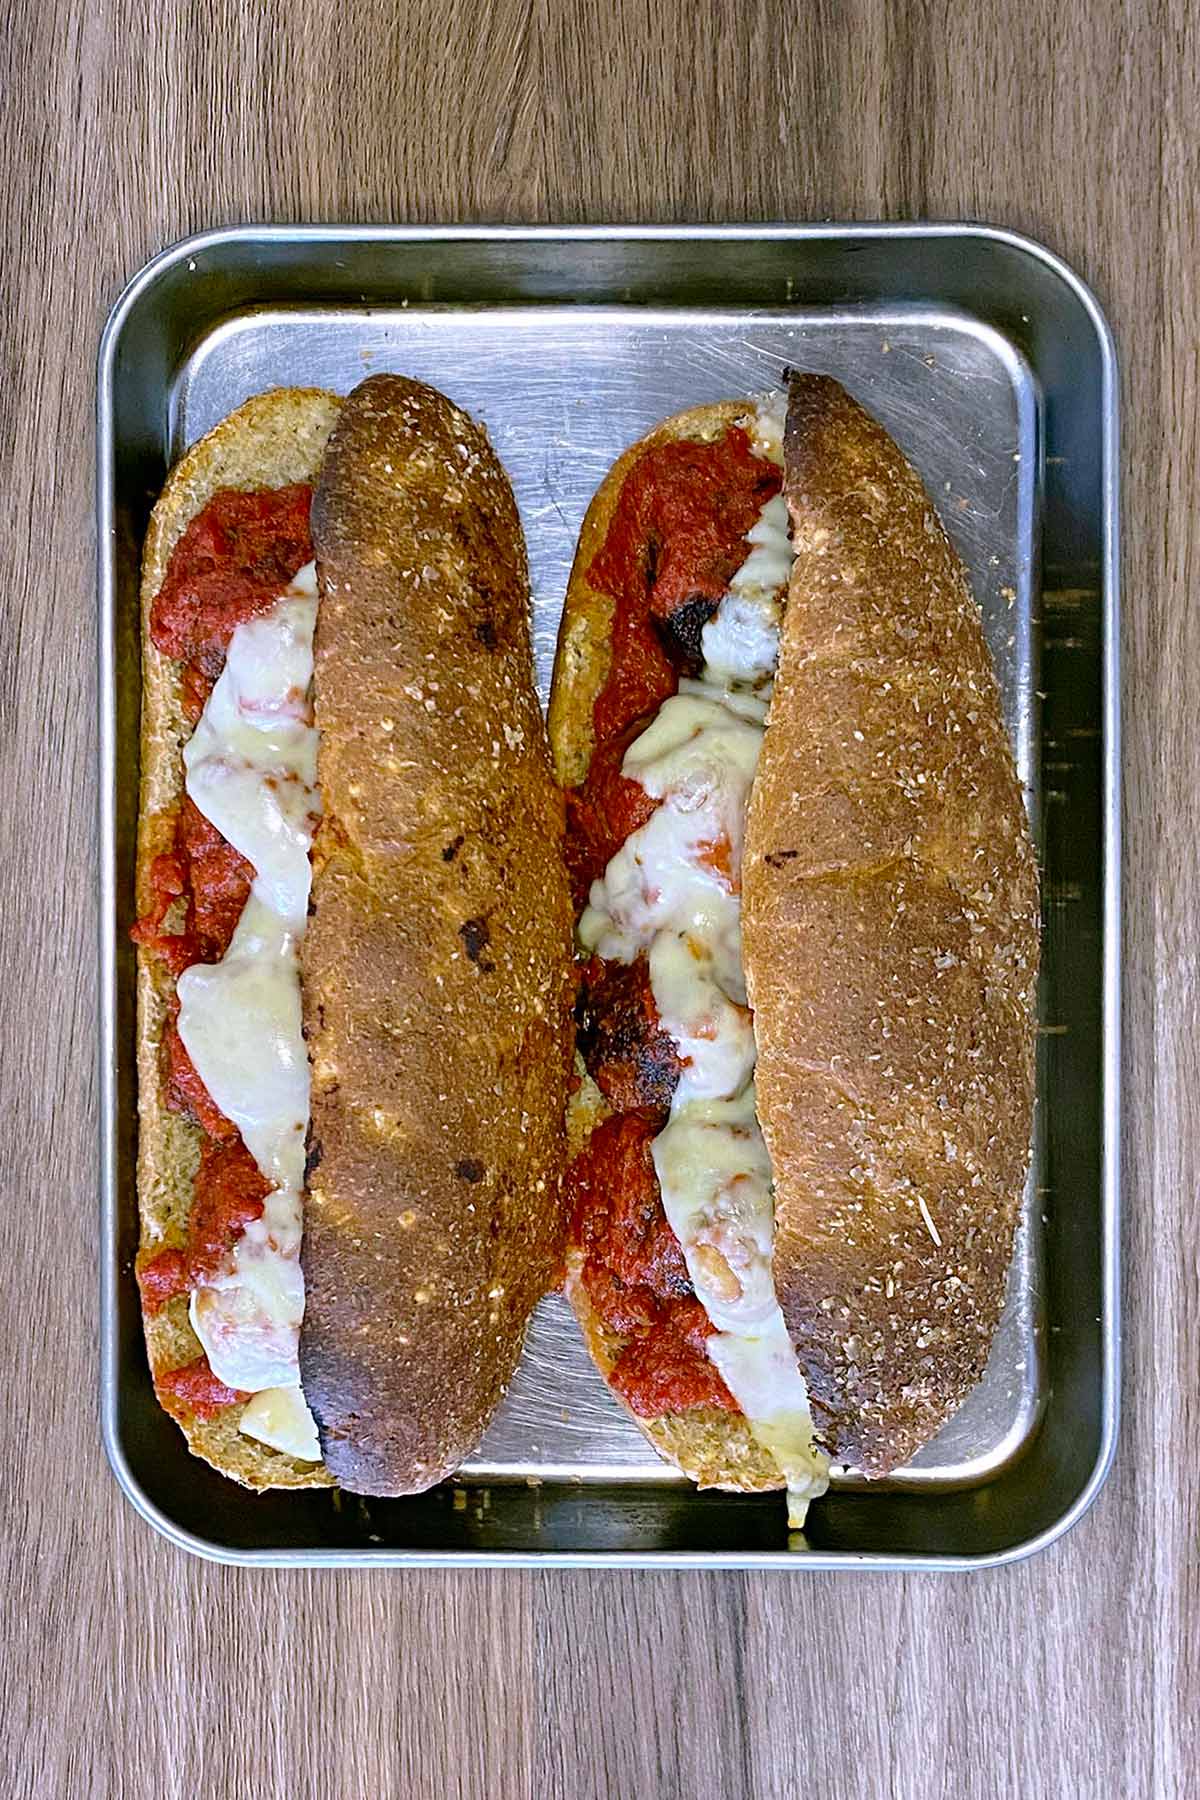 Two baked meatball subs with toasted bread and melted cheese.